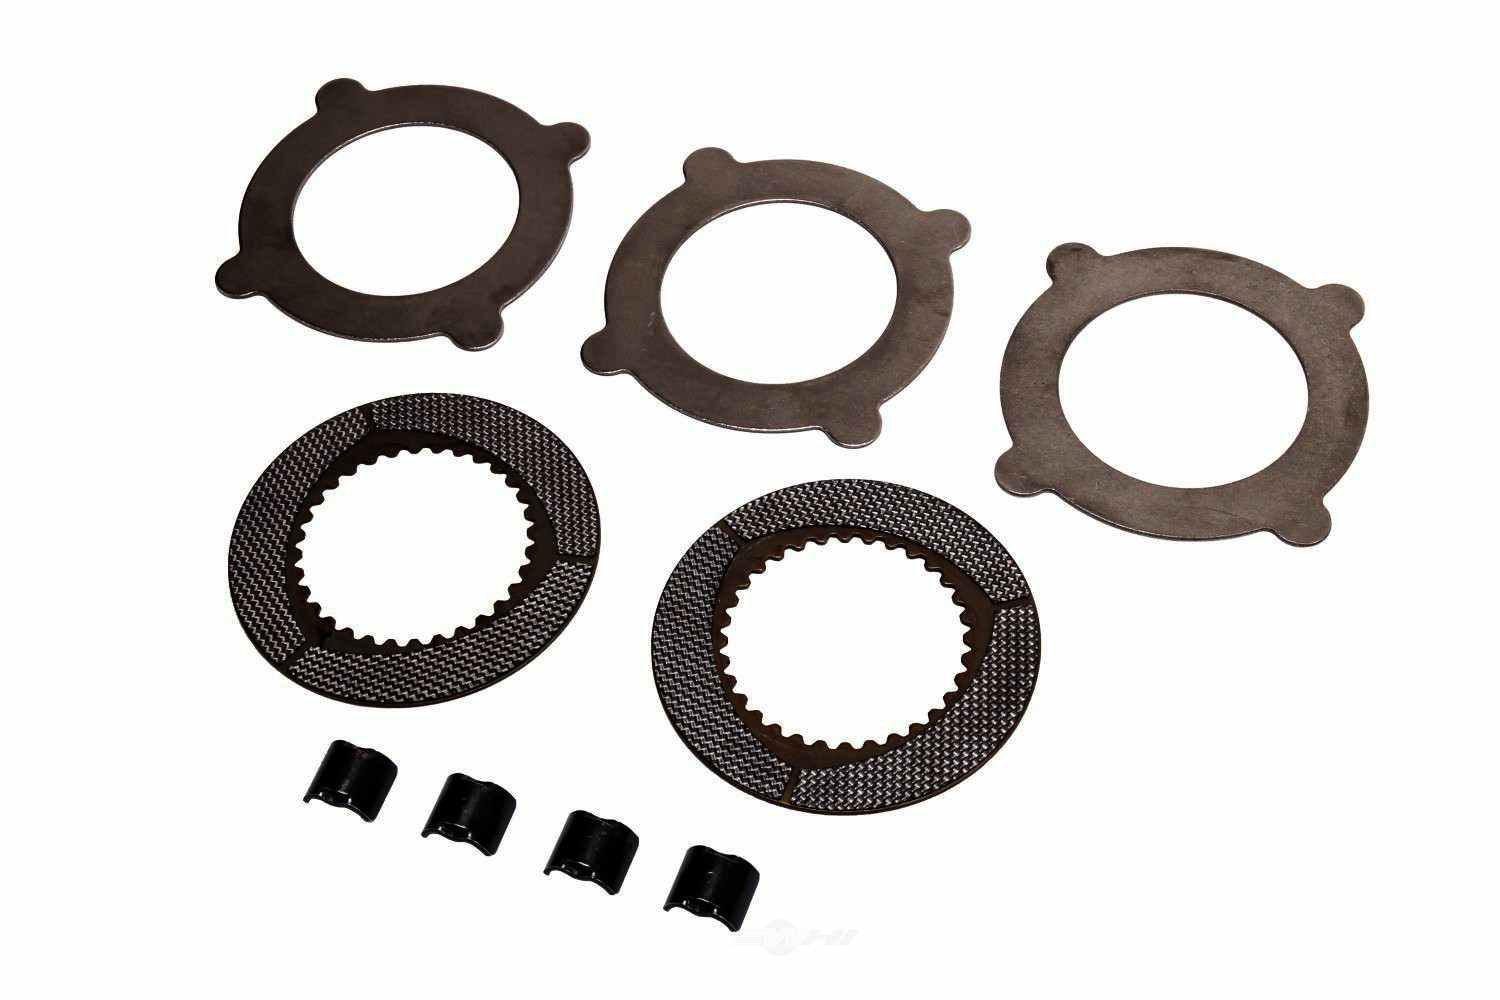 GM GENUINE PARTS - Differential Clutch Pack (Right) - GMP 12471544